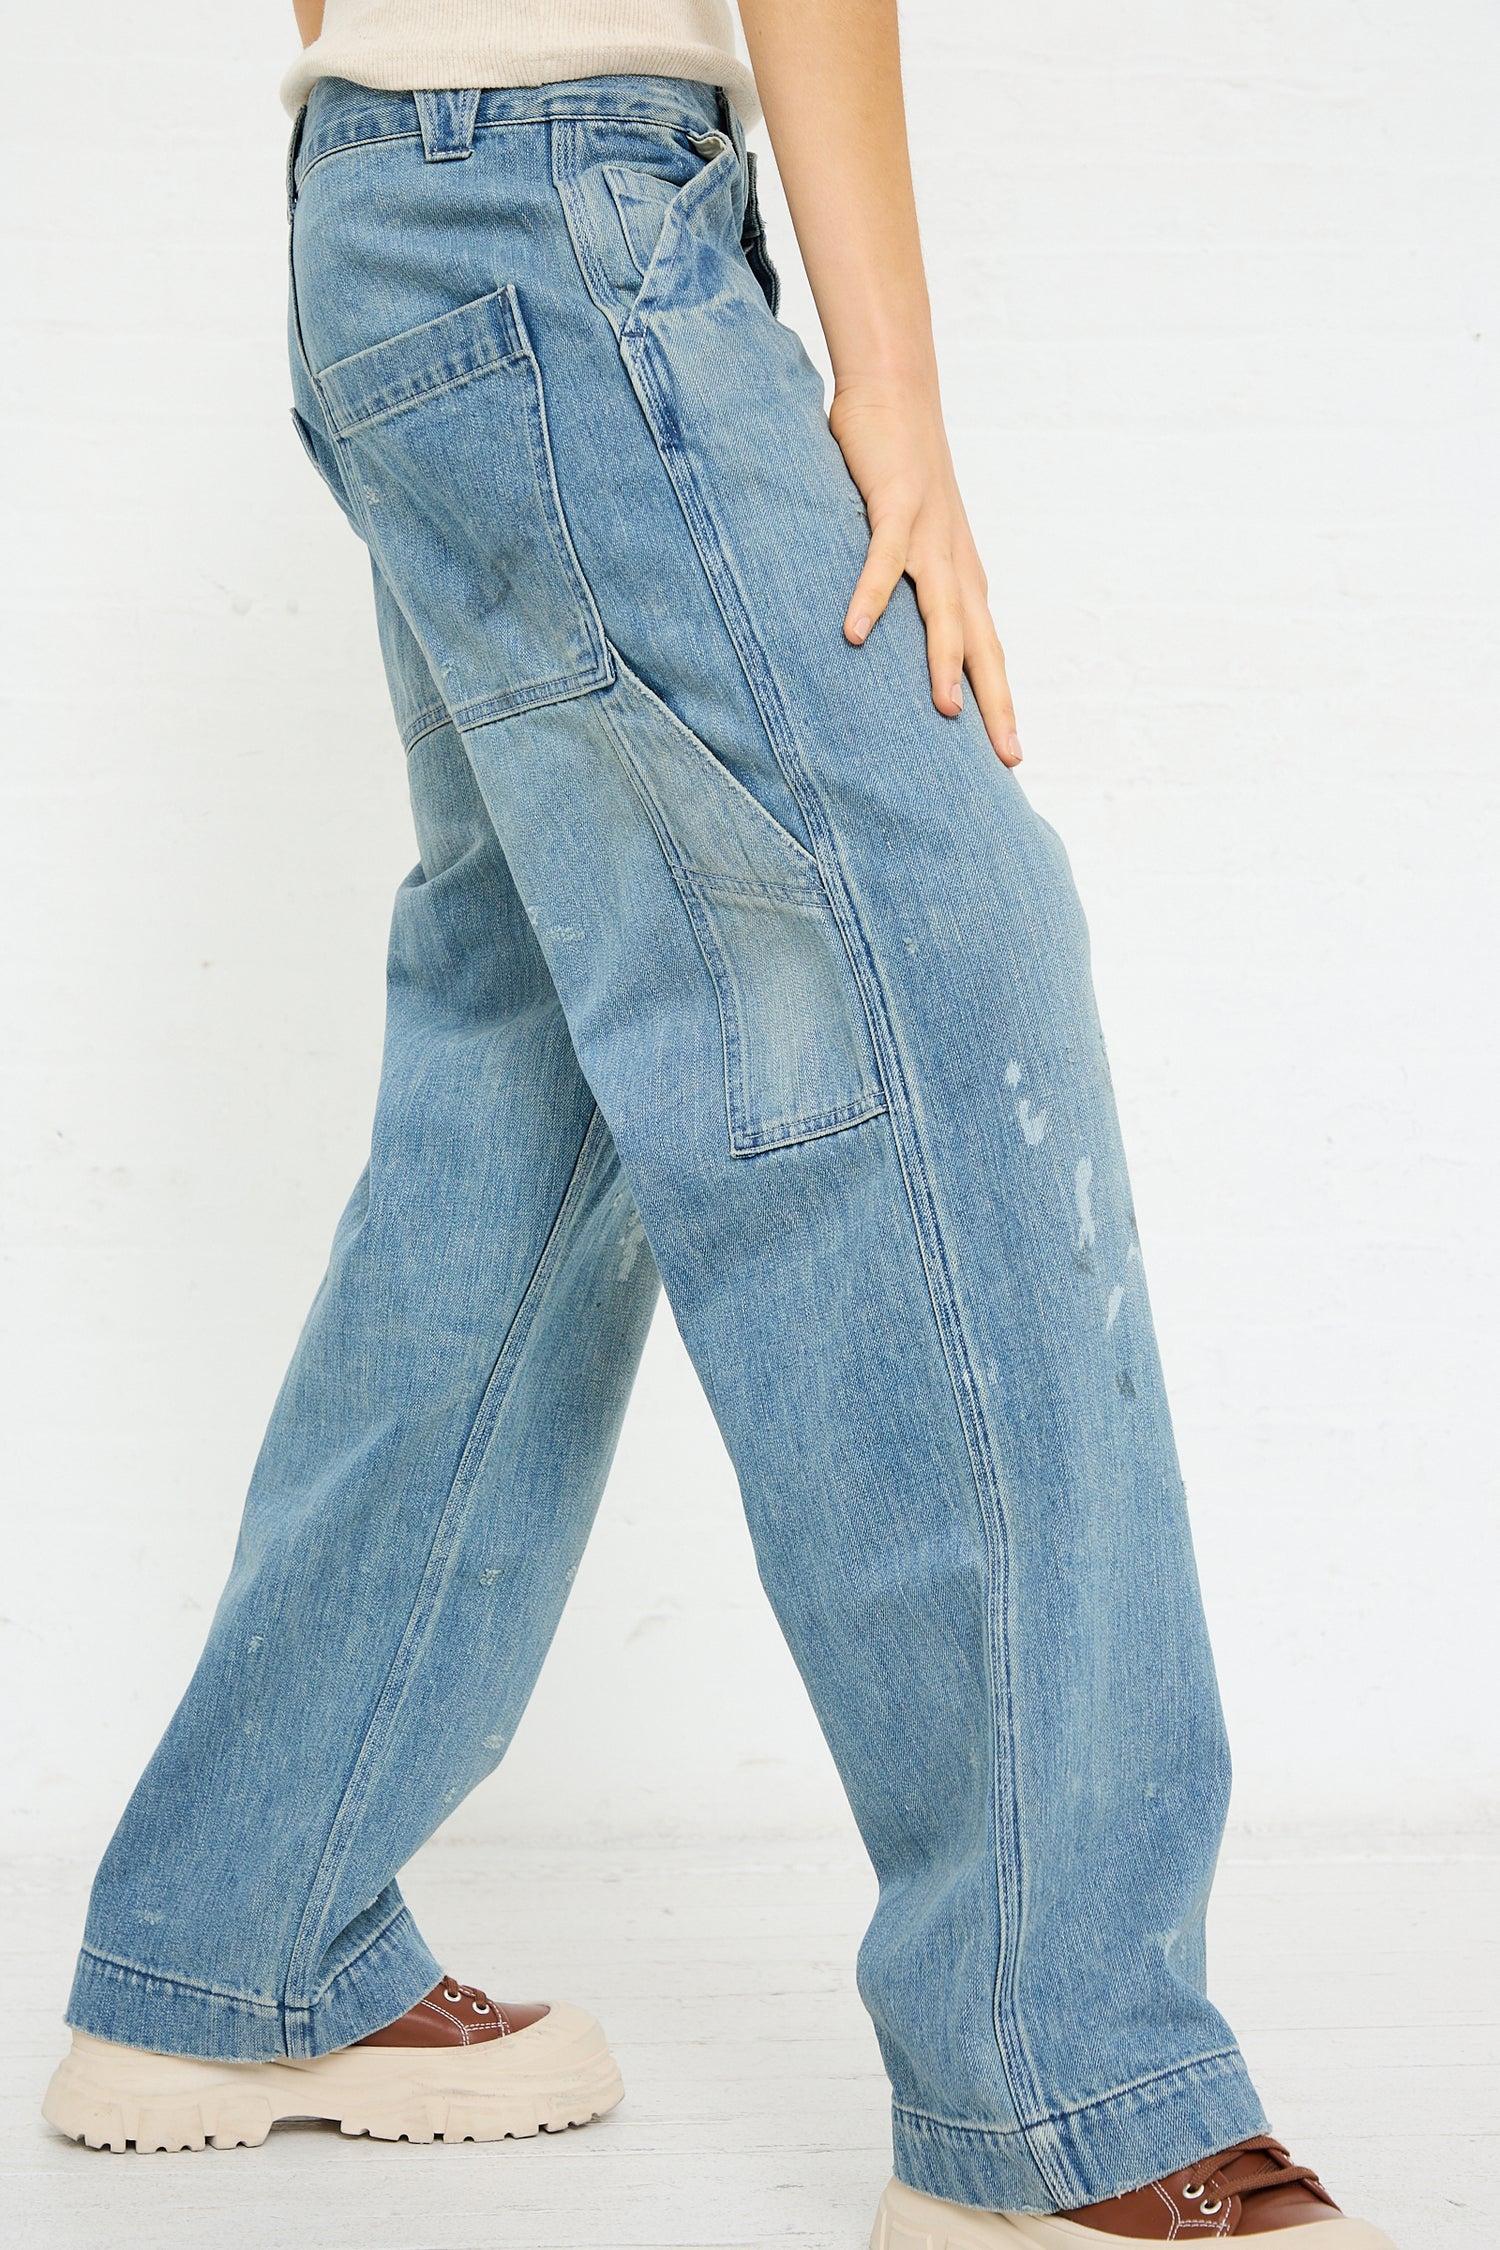 A person wearing Chimala's Denim Painter Pant in Vintage Wash and two-tone shoes.